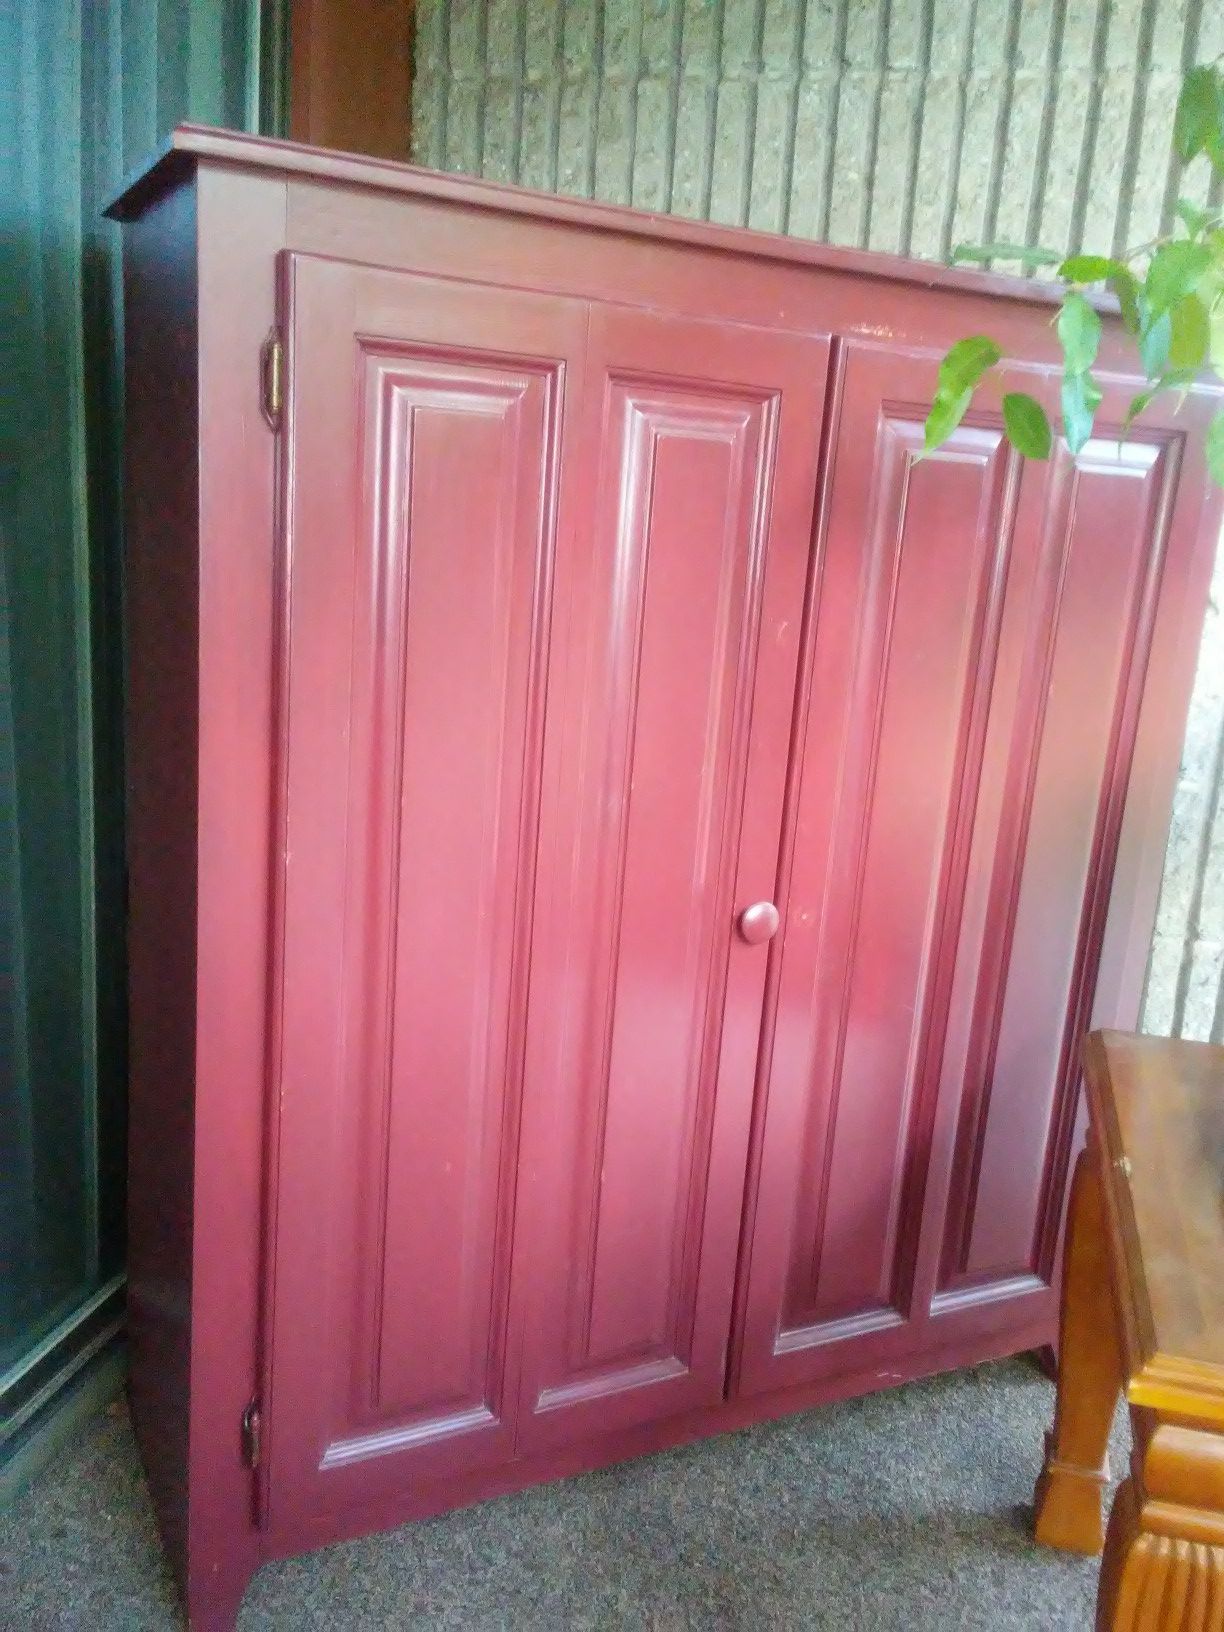 NICE SOLID WOOD ARMOIRE CABINET